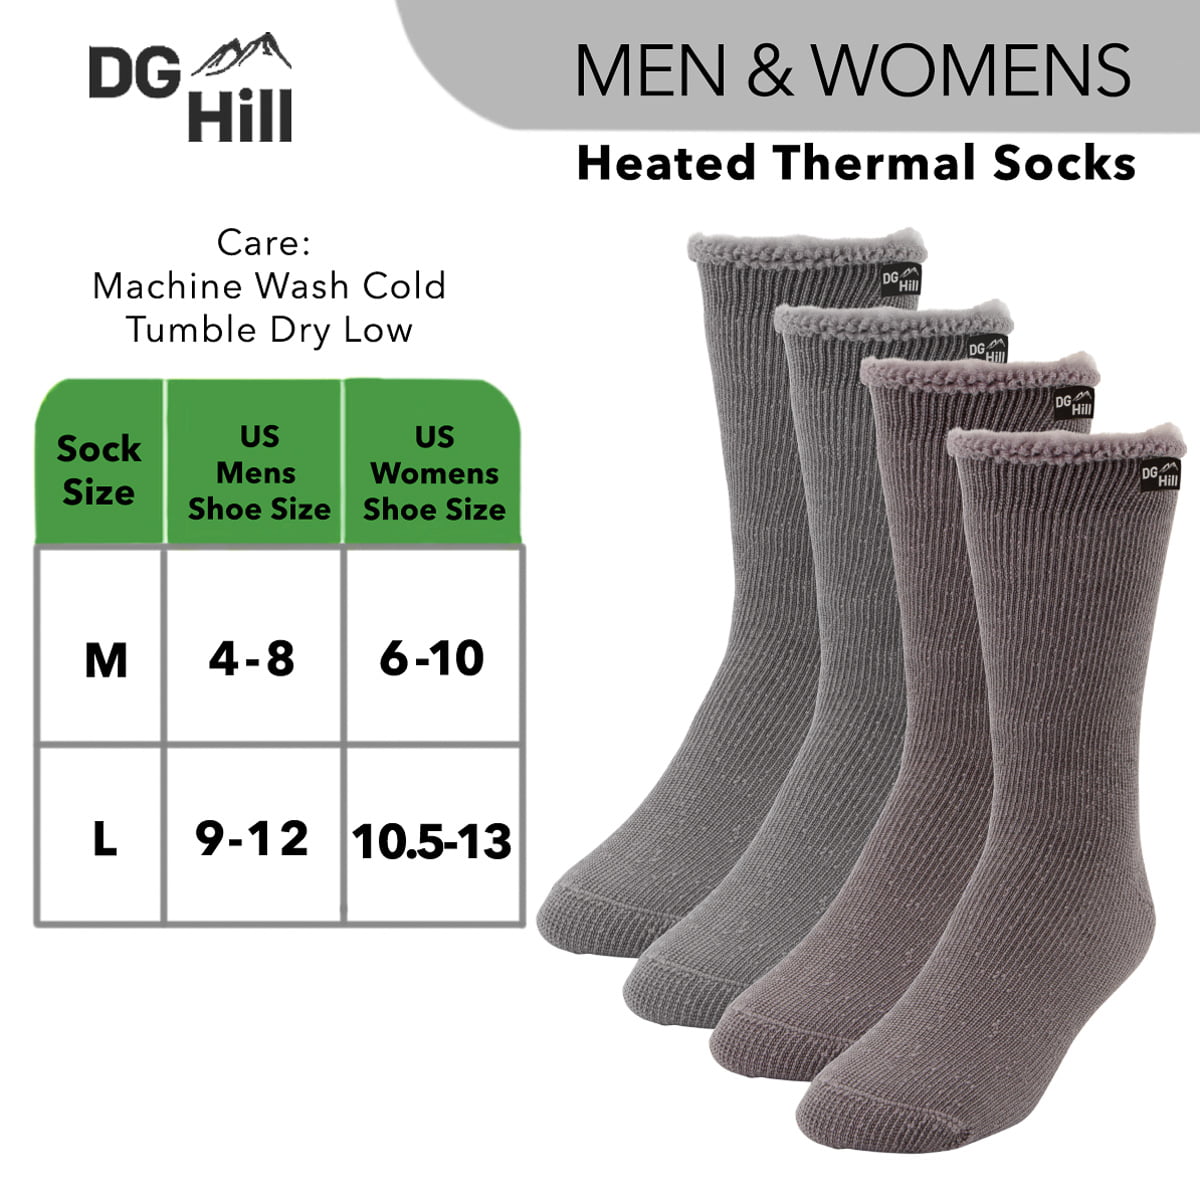 Insulated for Cold Weather 2pk or 4pk Heated Winter Boot Socks DG Hill Thermal Socks for Men and Women 